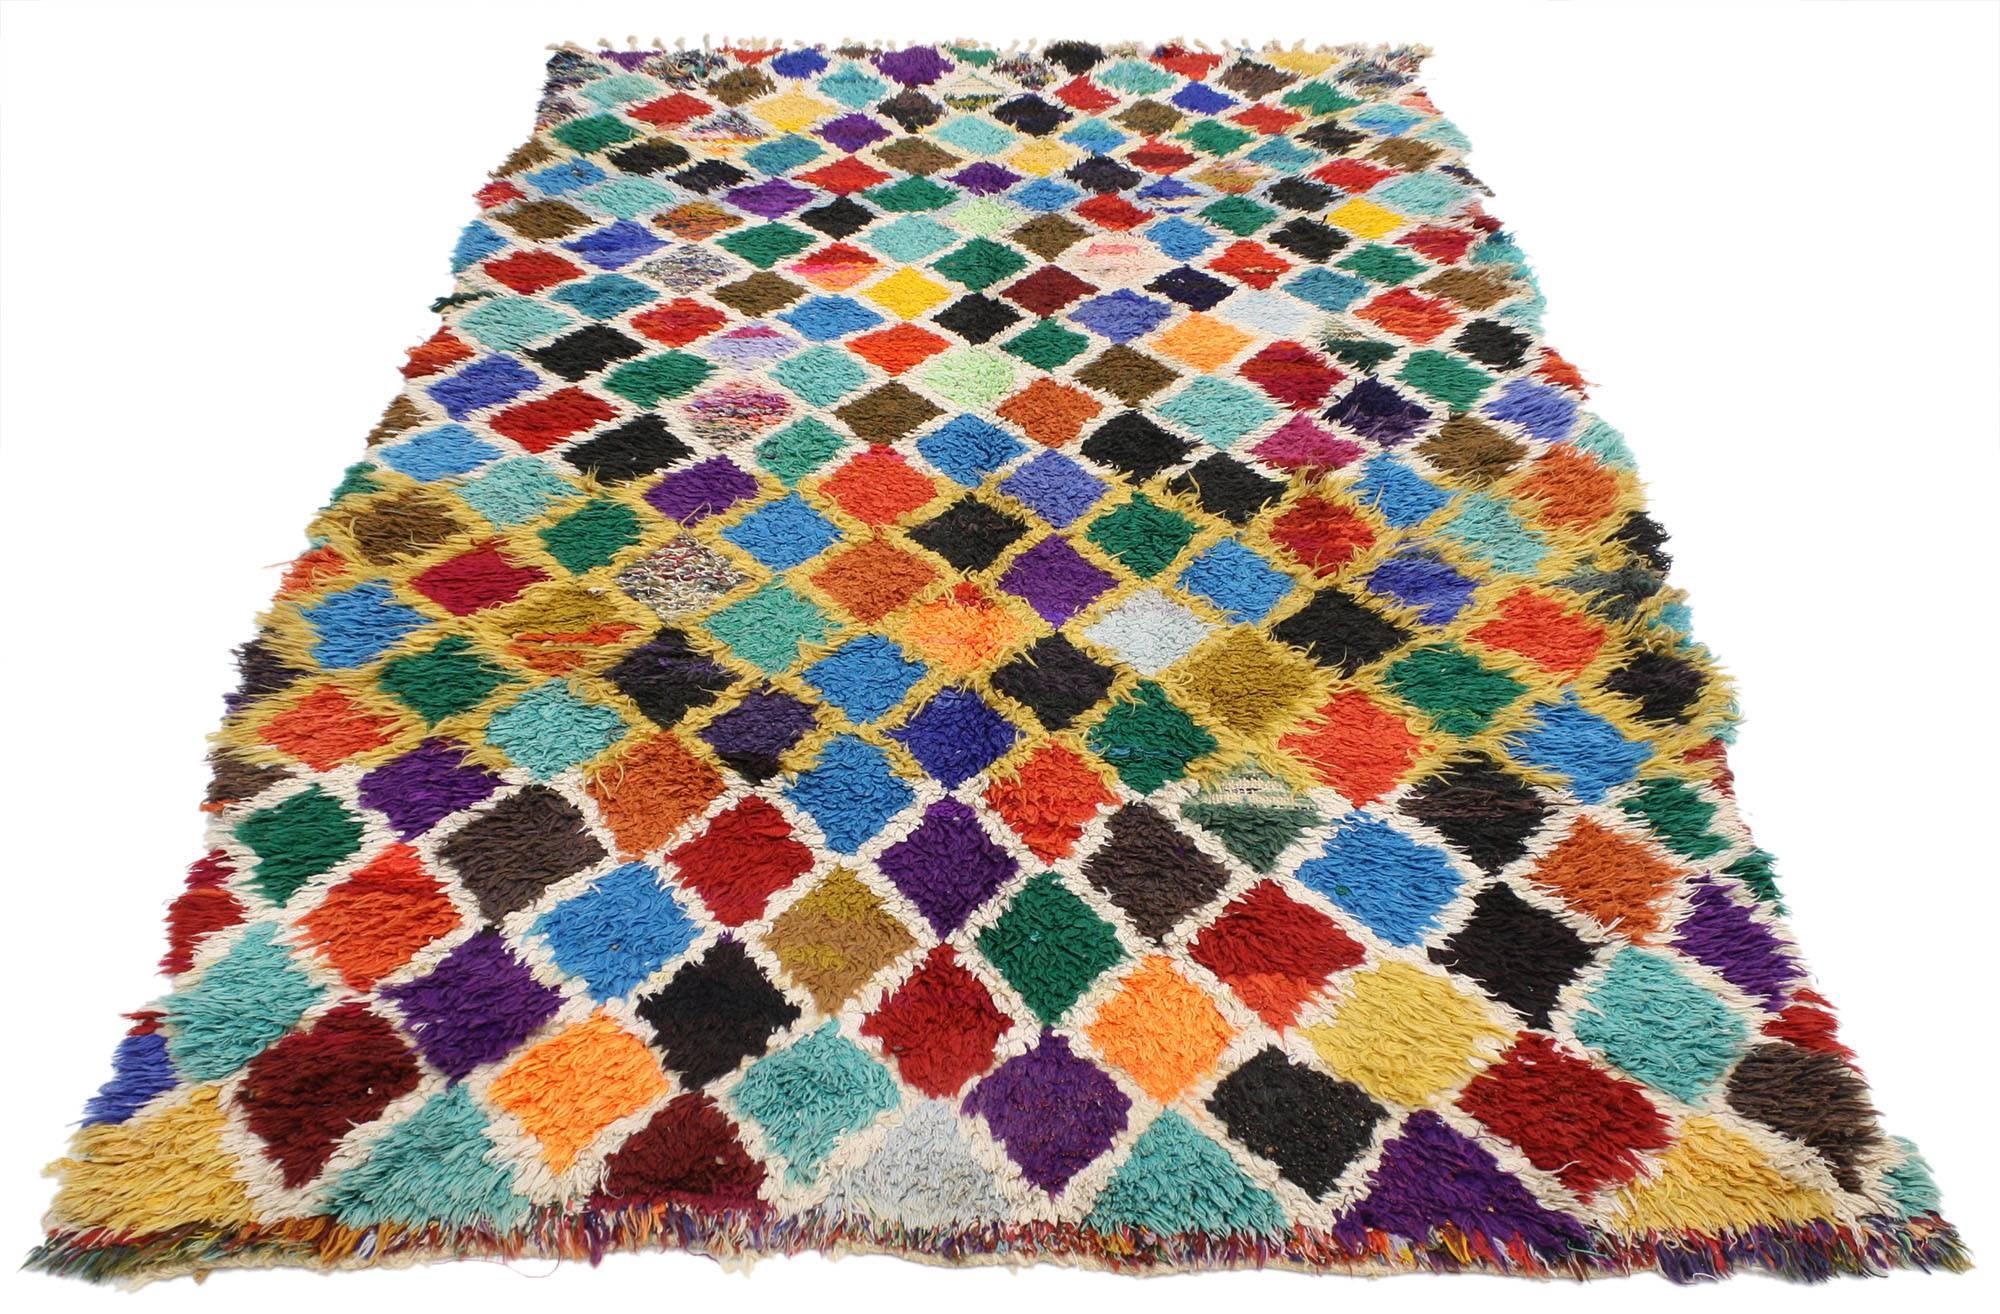 Hand-Knotted Vintage Berber Moroccan Runner with Diamond Pattern, Shag Hallway Runner